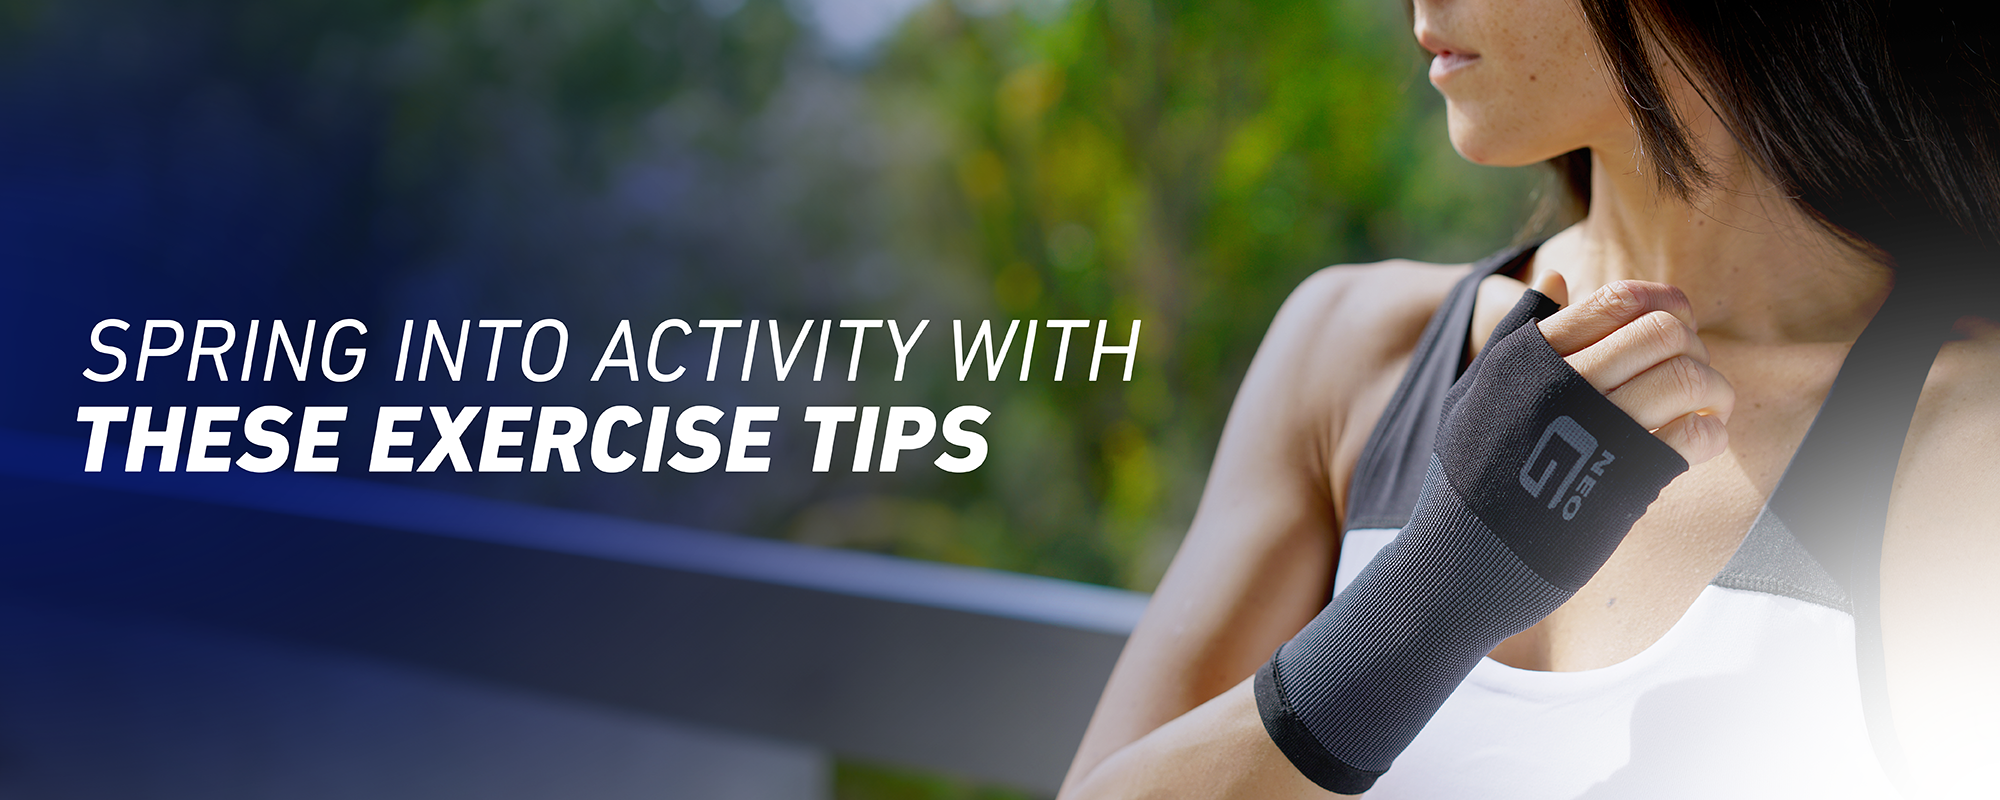 Spring into activity with these exercise tips